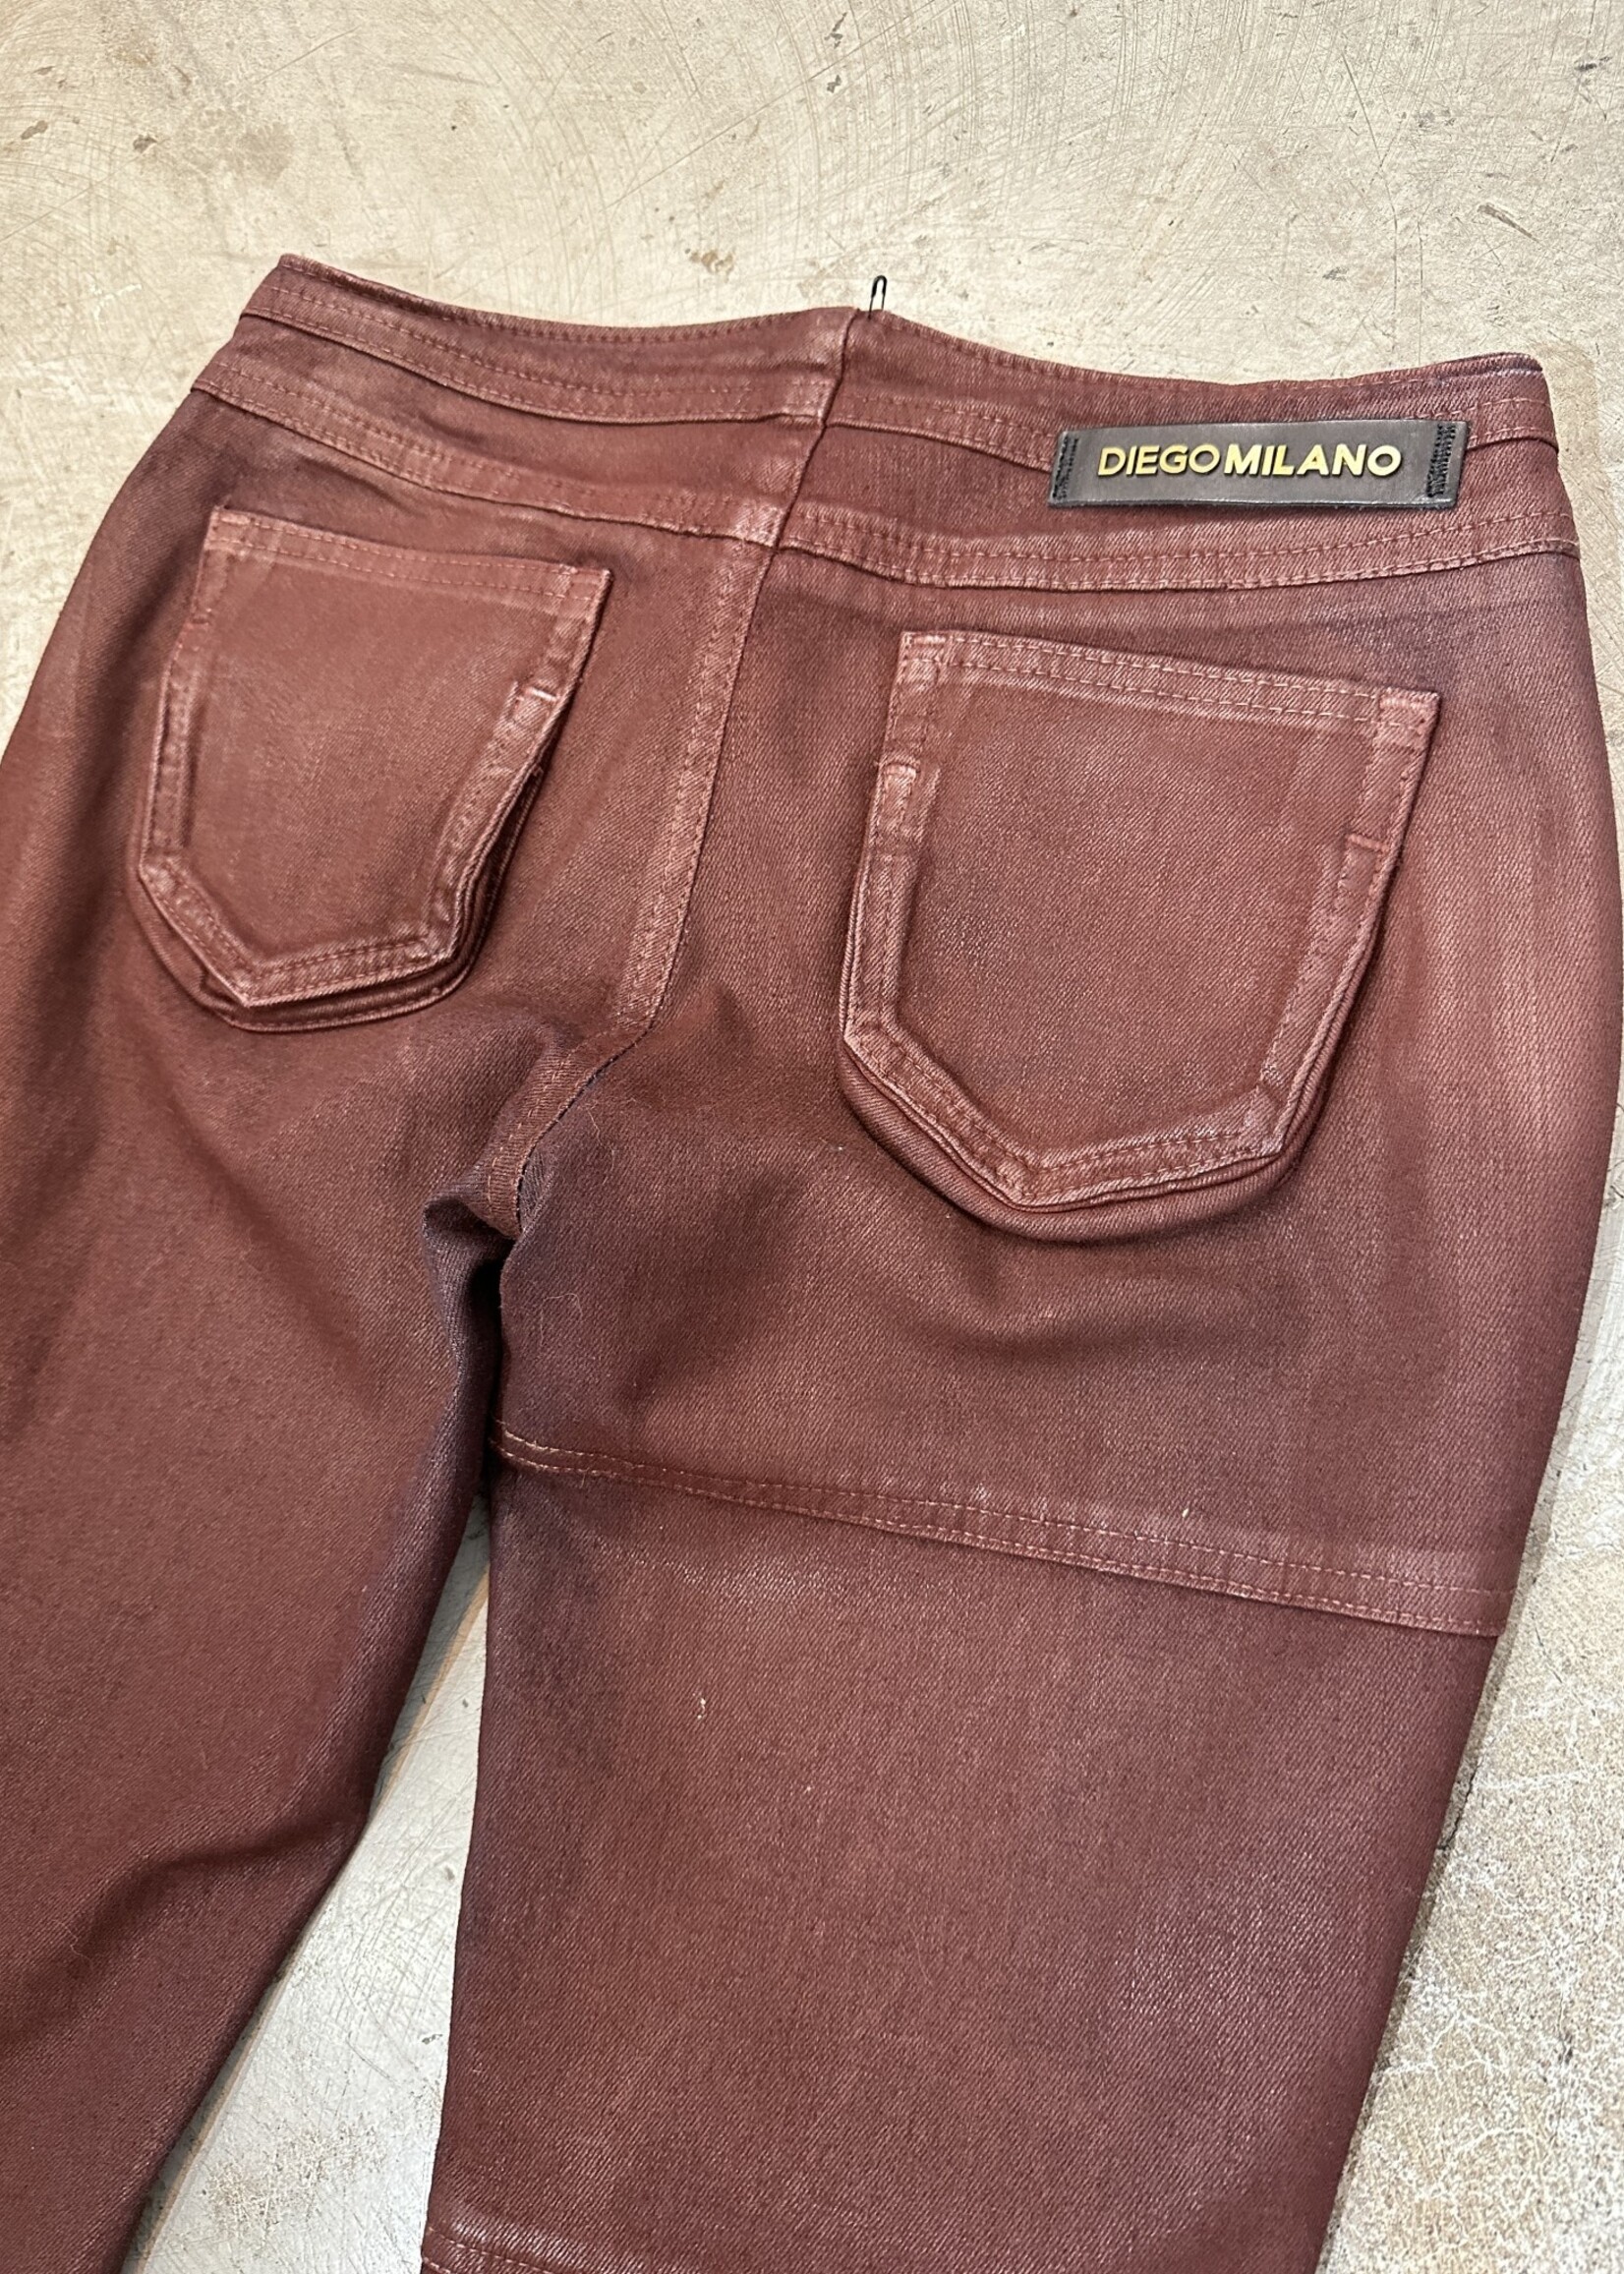 Diego Milano Y2K Low Rise Brown Waxed Flares 25/26"